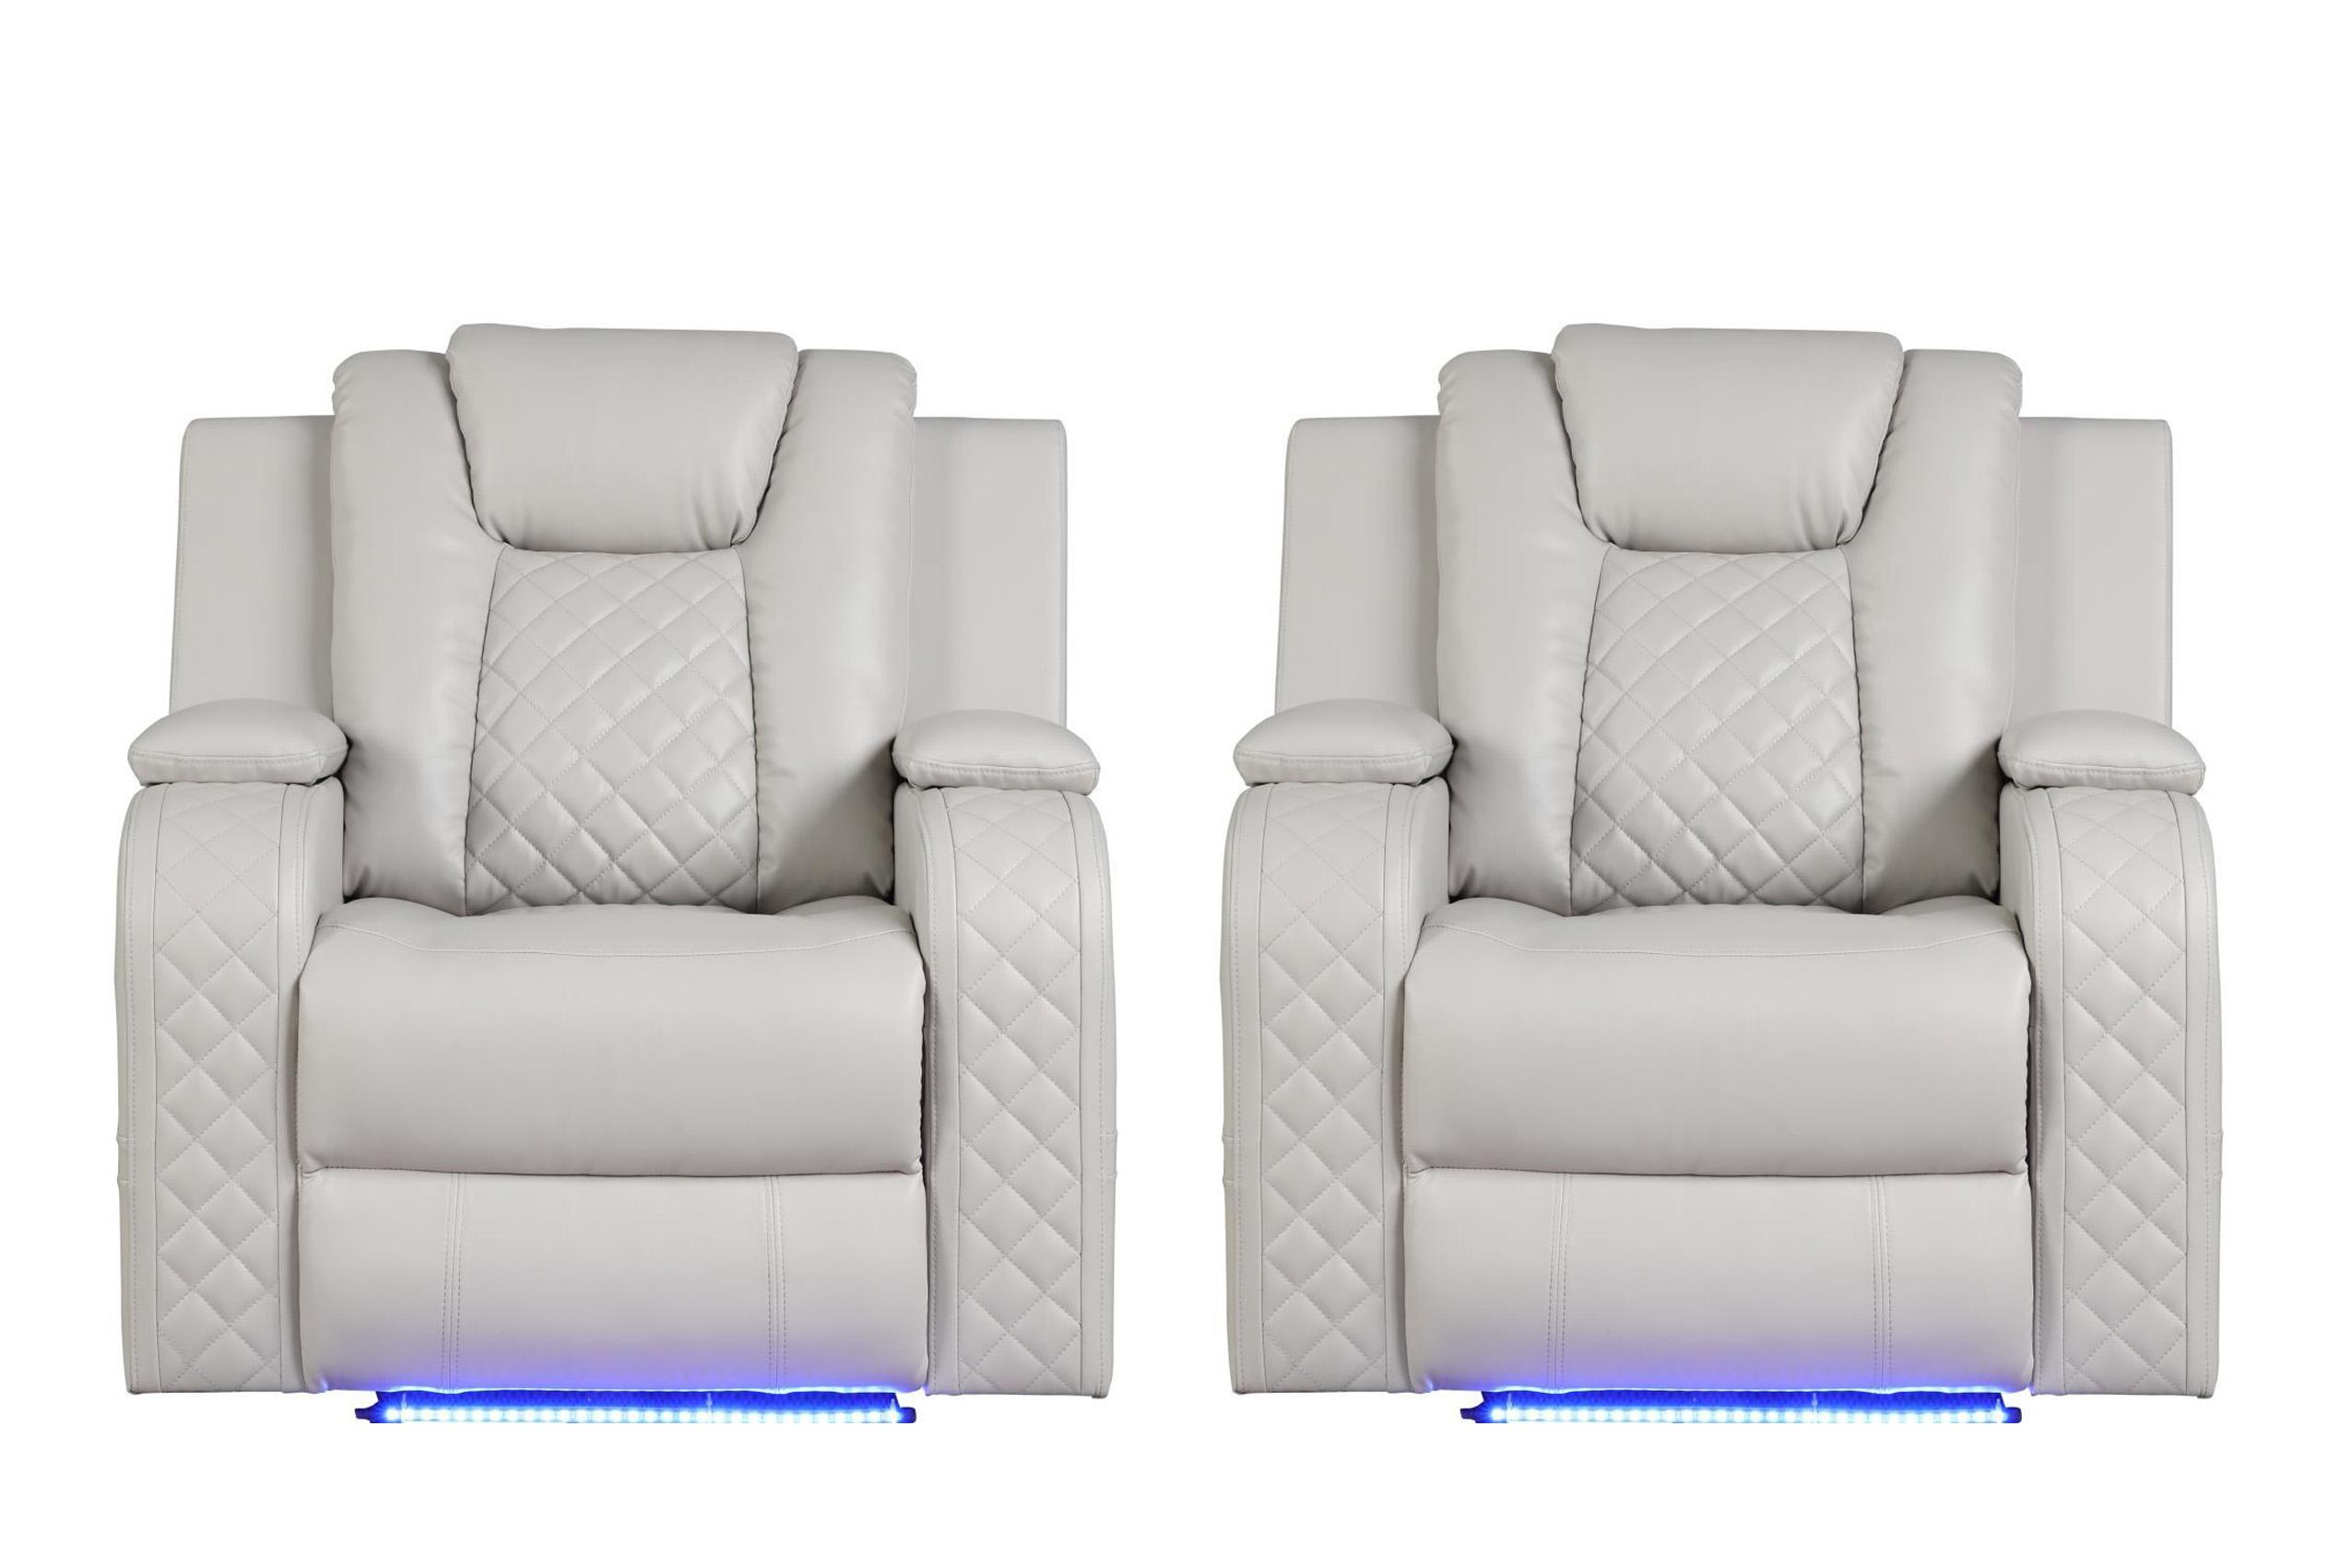 Contemporary, Modern Recliner Chair Set BENZ ICE WHITE BENZ-WH-CH-2PC in White Faux Leather